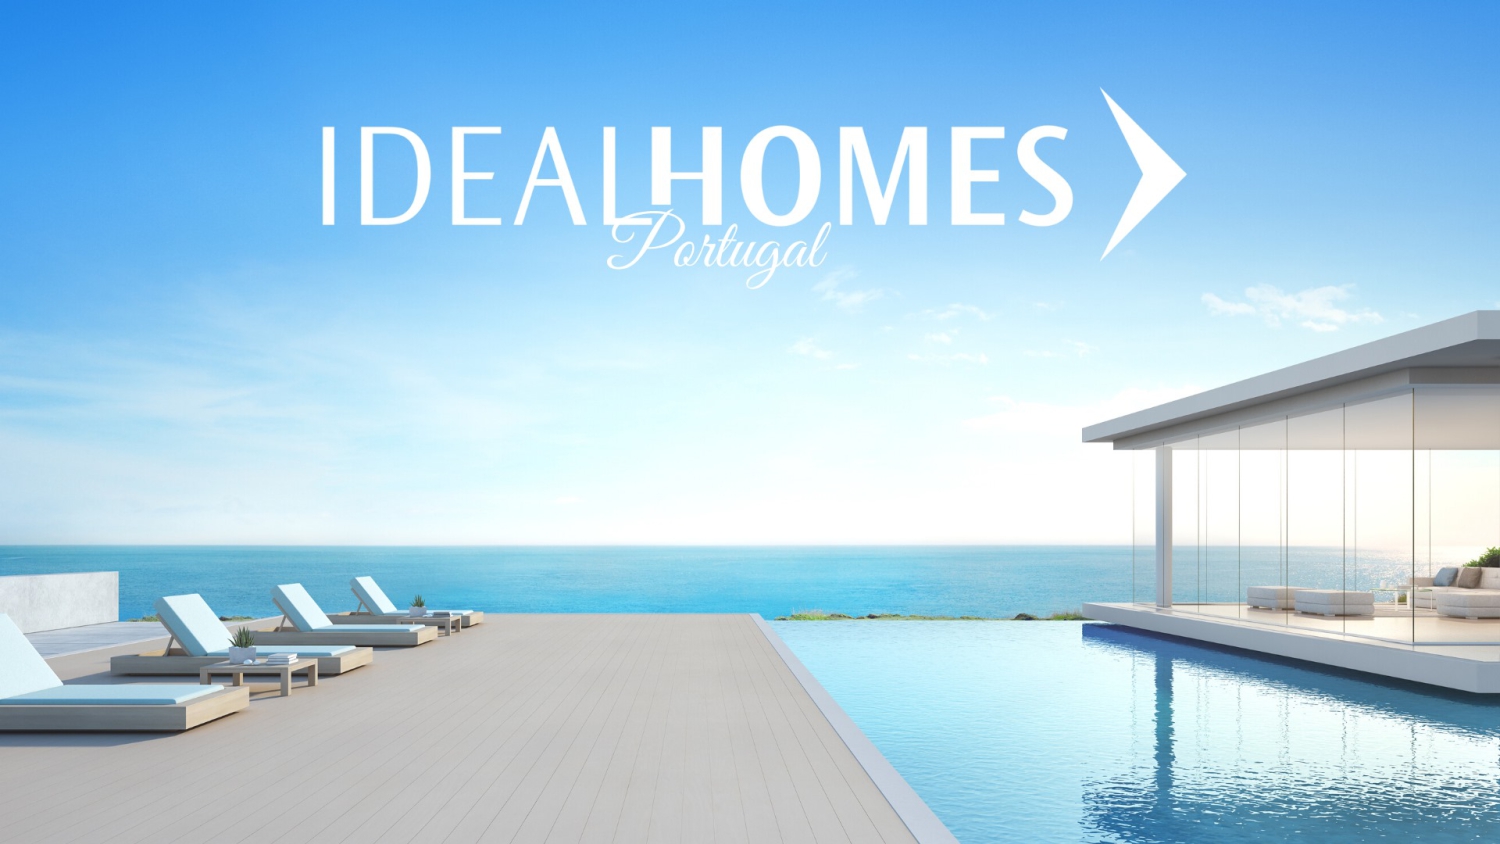 IHTV - IdealHomes TV. All about Property in Portugal